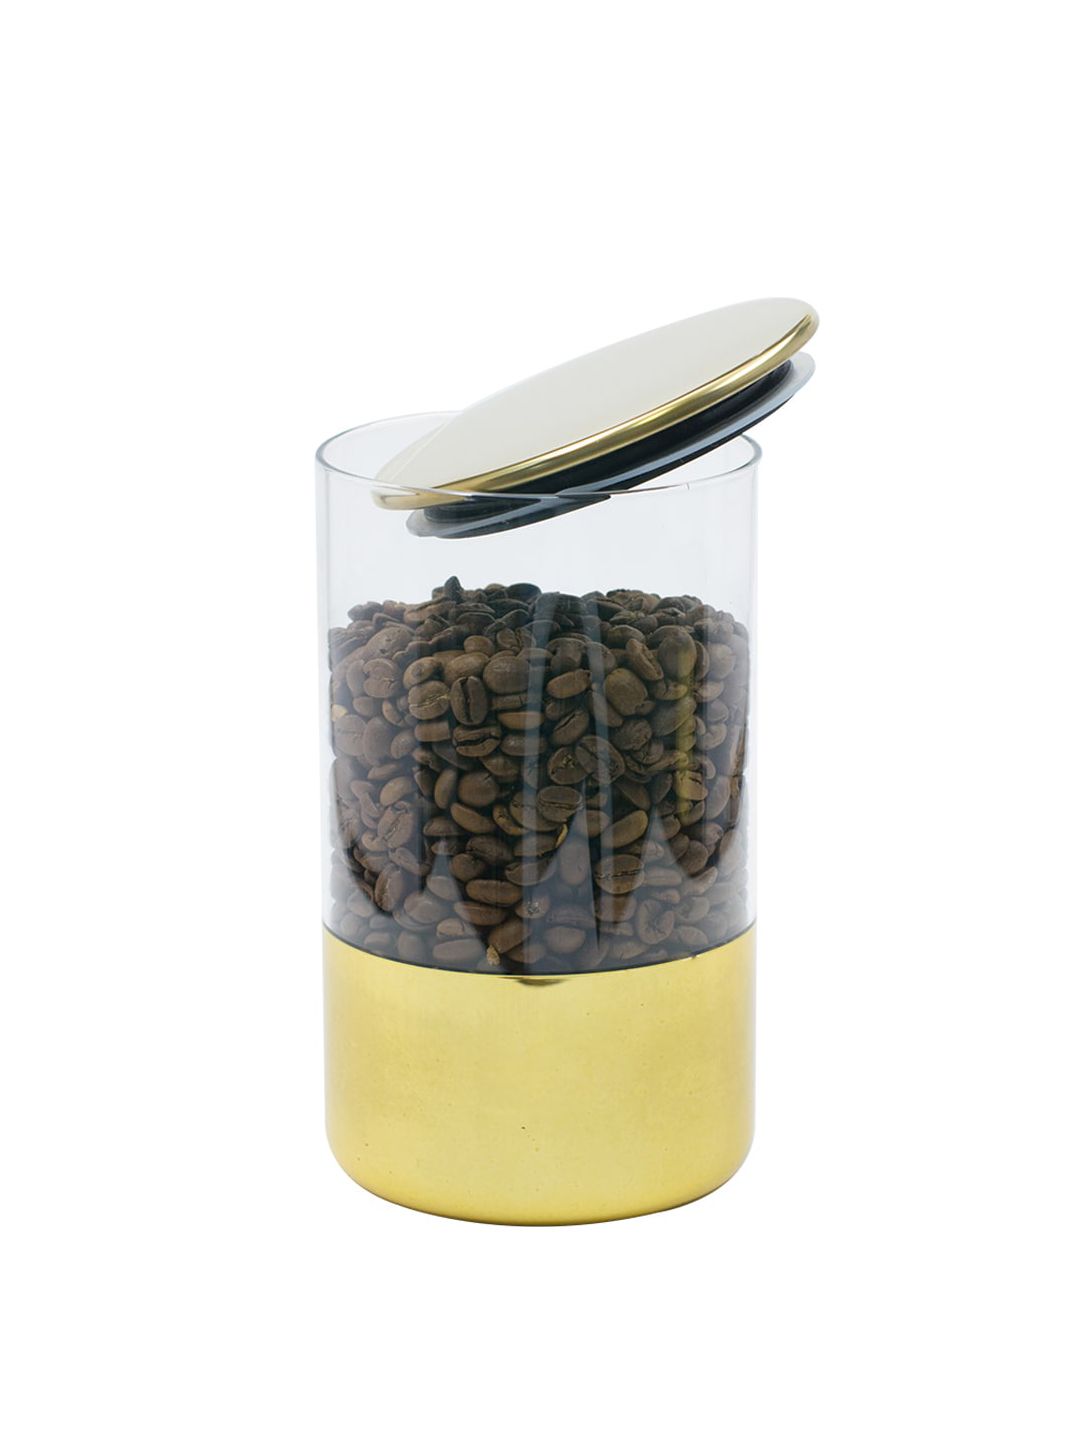 MARKET99 Gold-Toned Glass Jar With Metal Lid Kitchen Storage Price in India